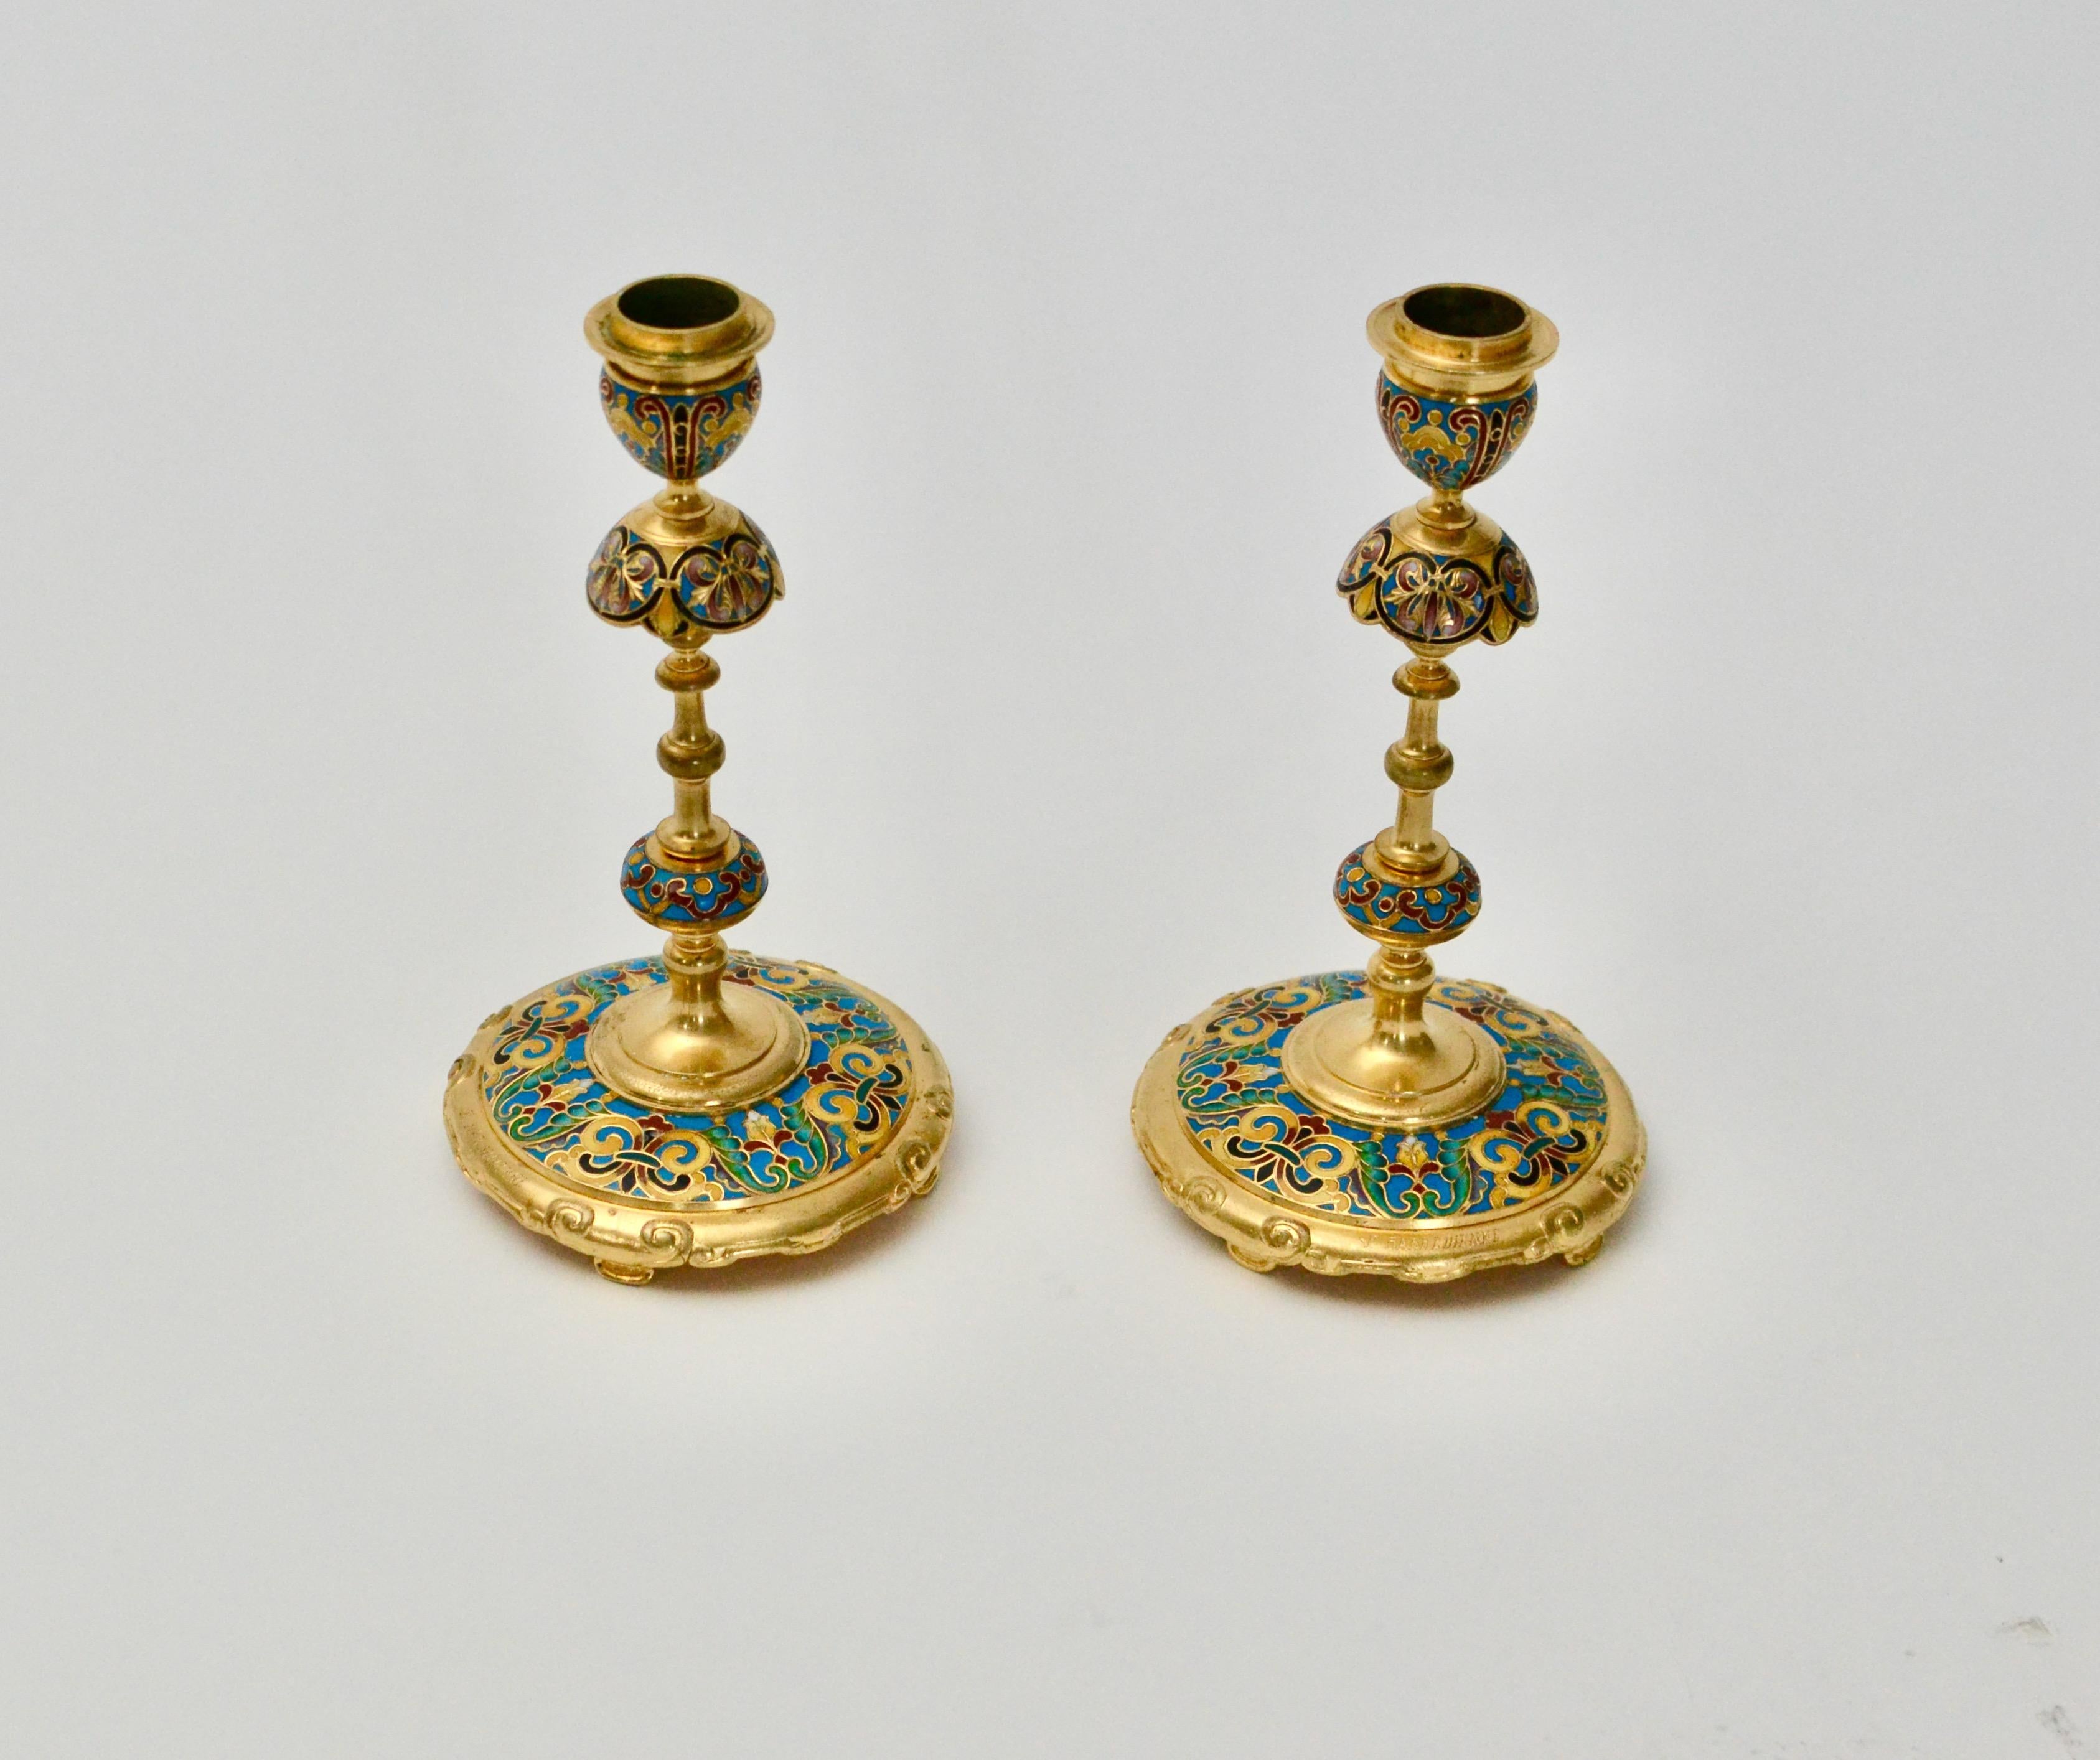 Chinoiserie 19th Century F. Barbedienne Bronze Champlevé Enamel Candlesticks  For Sale